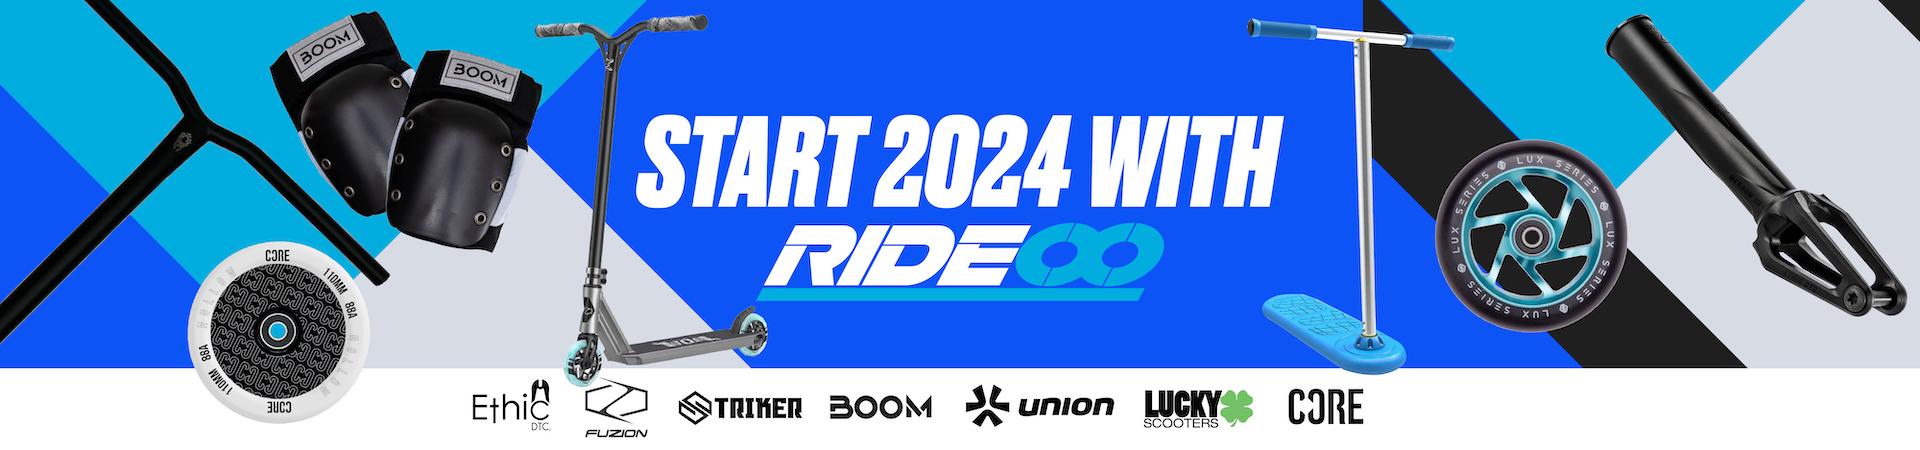 Start 2024 with Rideoo